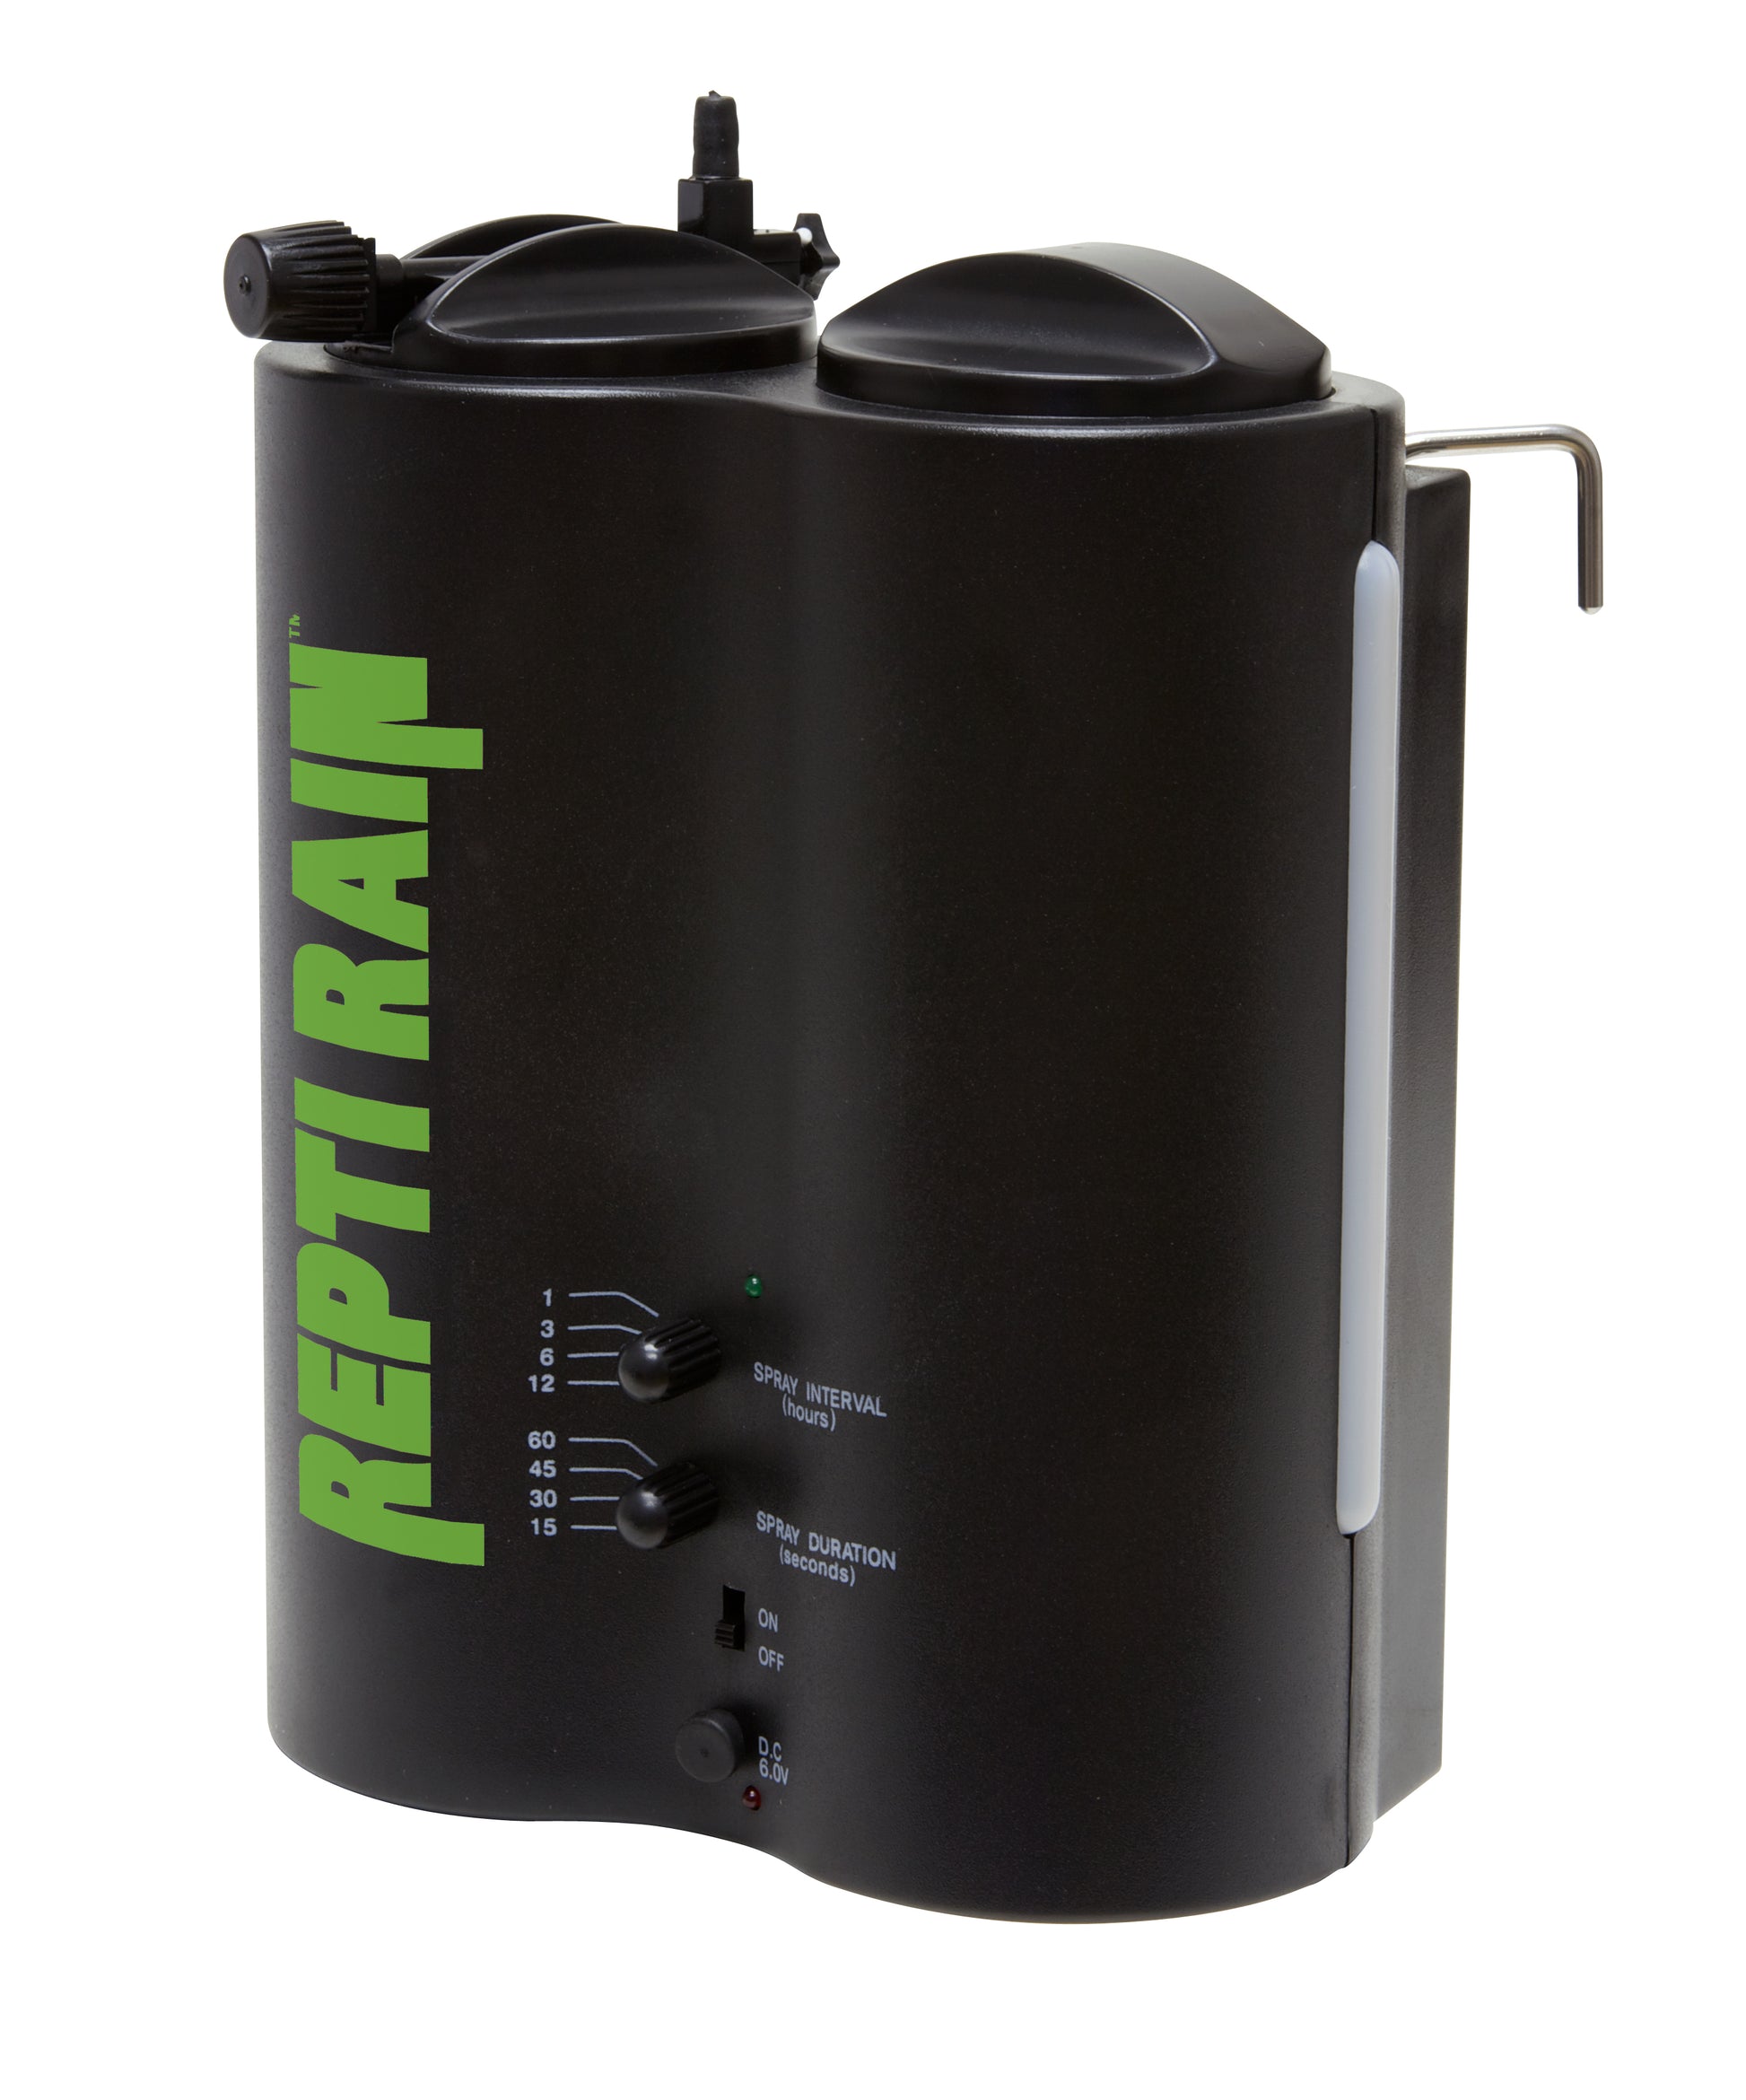 Repti Rain Unit. Spray interval (hours) 1, 3, 6, 12. Spray Duration (Seconds) 60, 45, 30, 15. On/Off Switch. DC input. Indication Light.